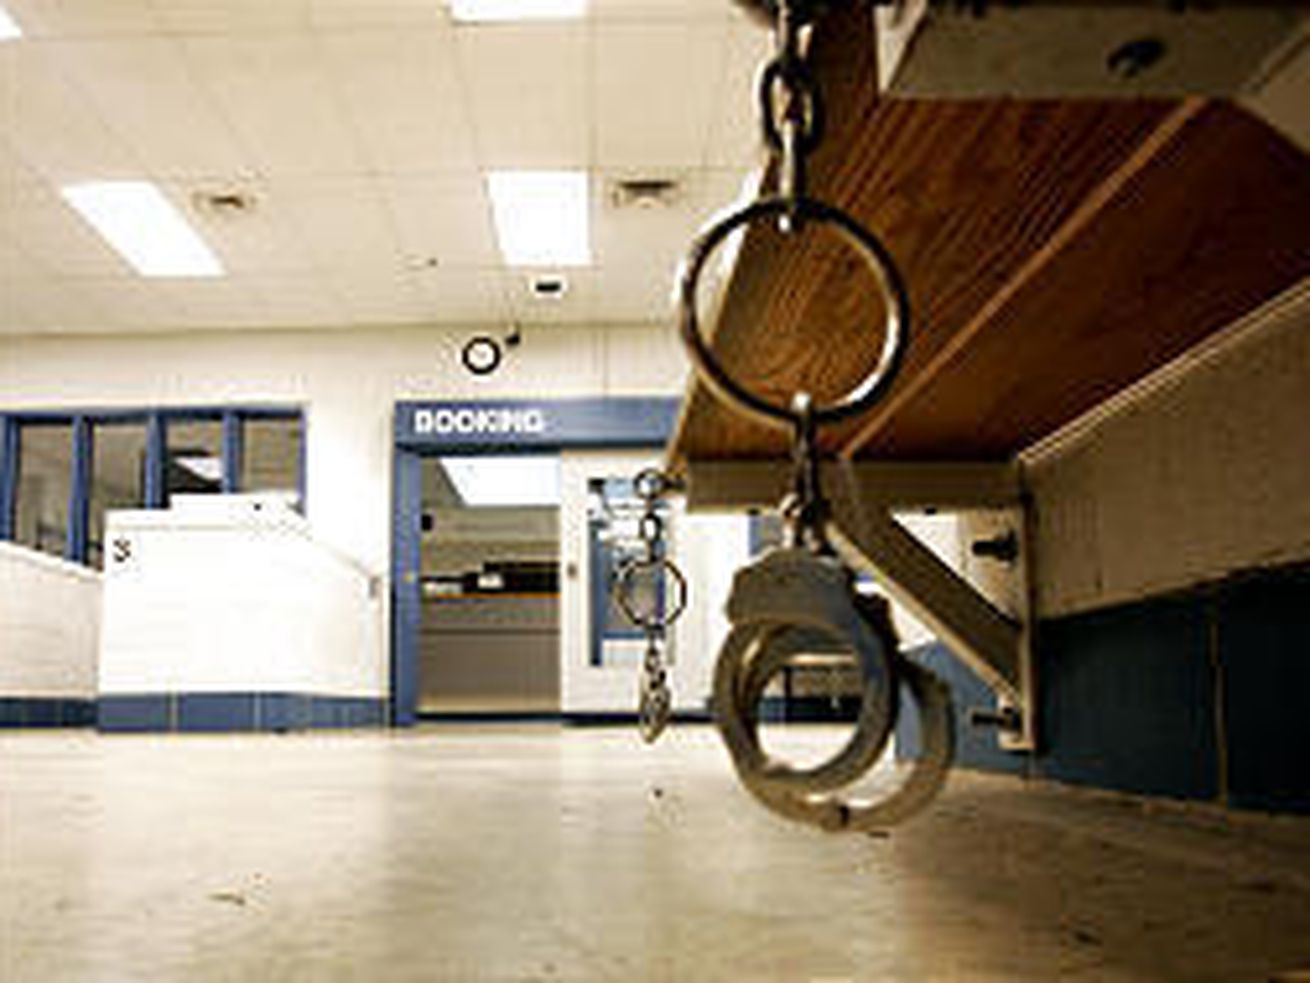 Handcuffs hang from a bench in the pre-booking area of the Utah County Jail, where suicides are increasing.